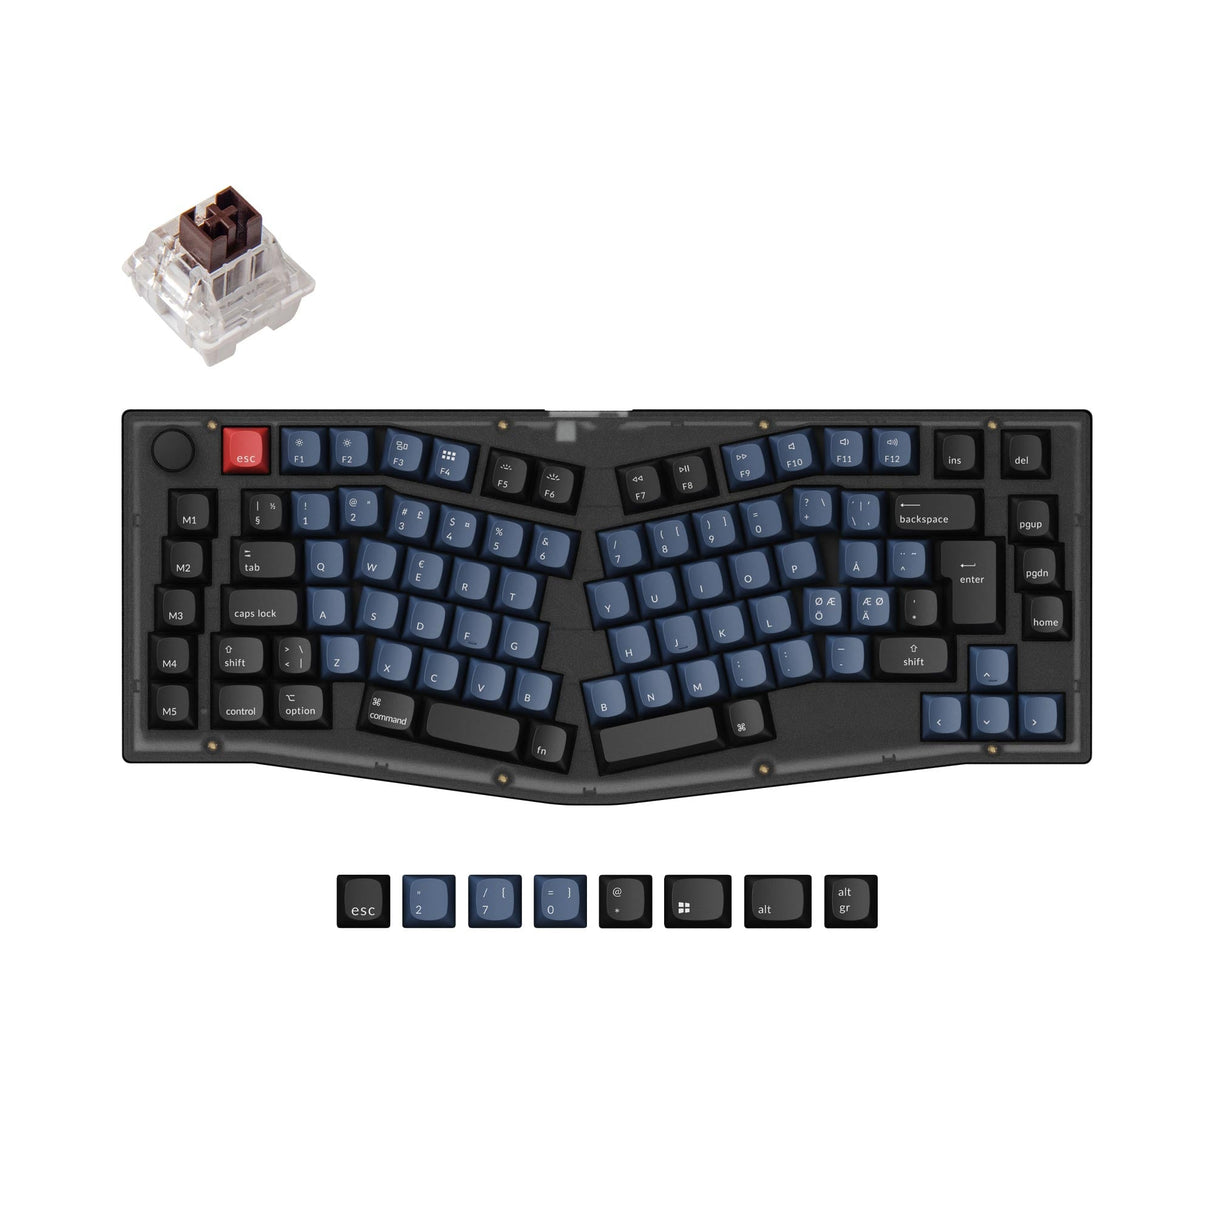 Keychron V10 QMK VIA custom mechanical keyboard Alice layout frosted black for Mac Window Linux fully assembled knob black Nordic ISO layout Keychron K pro switch brown